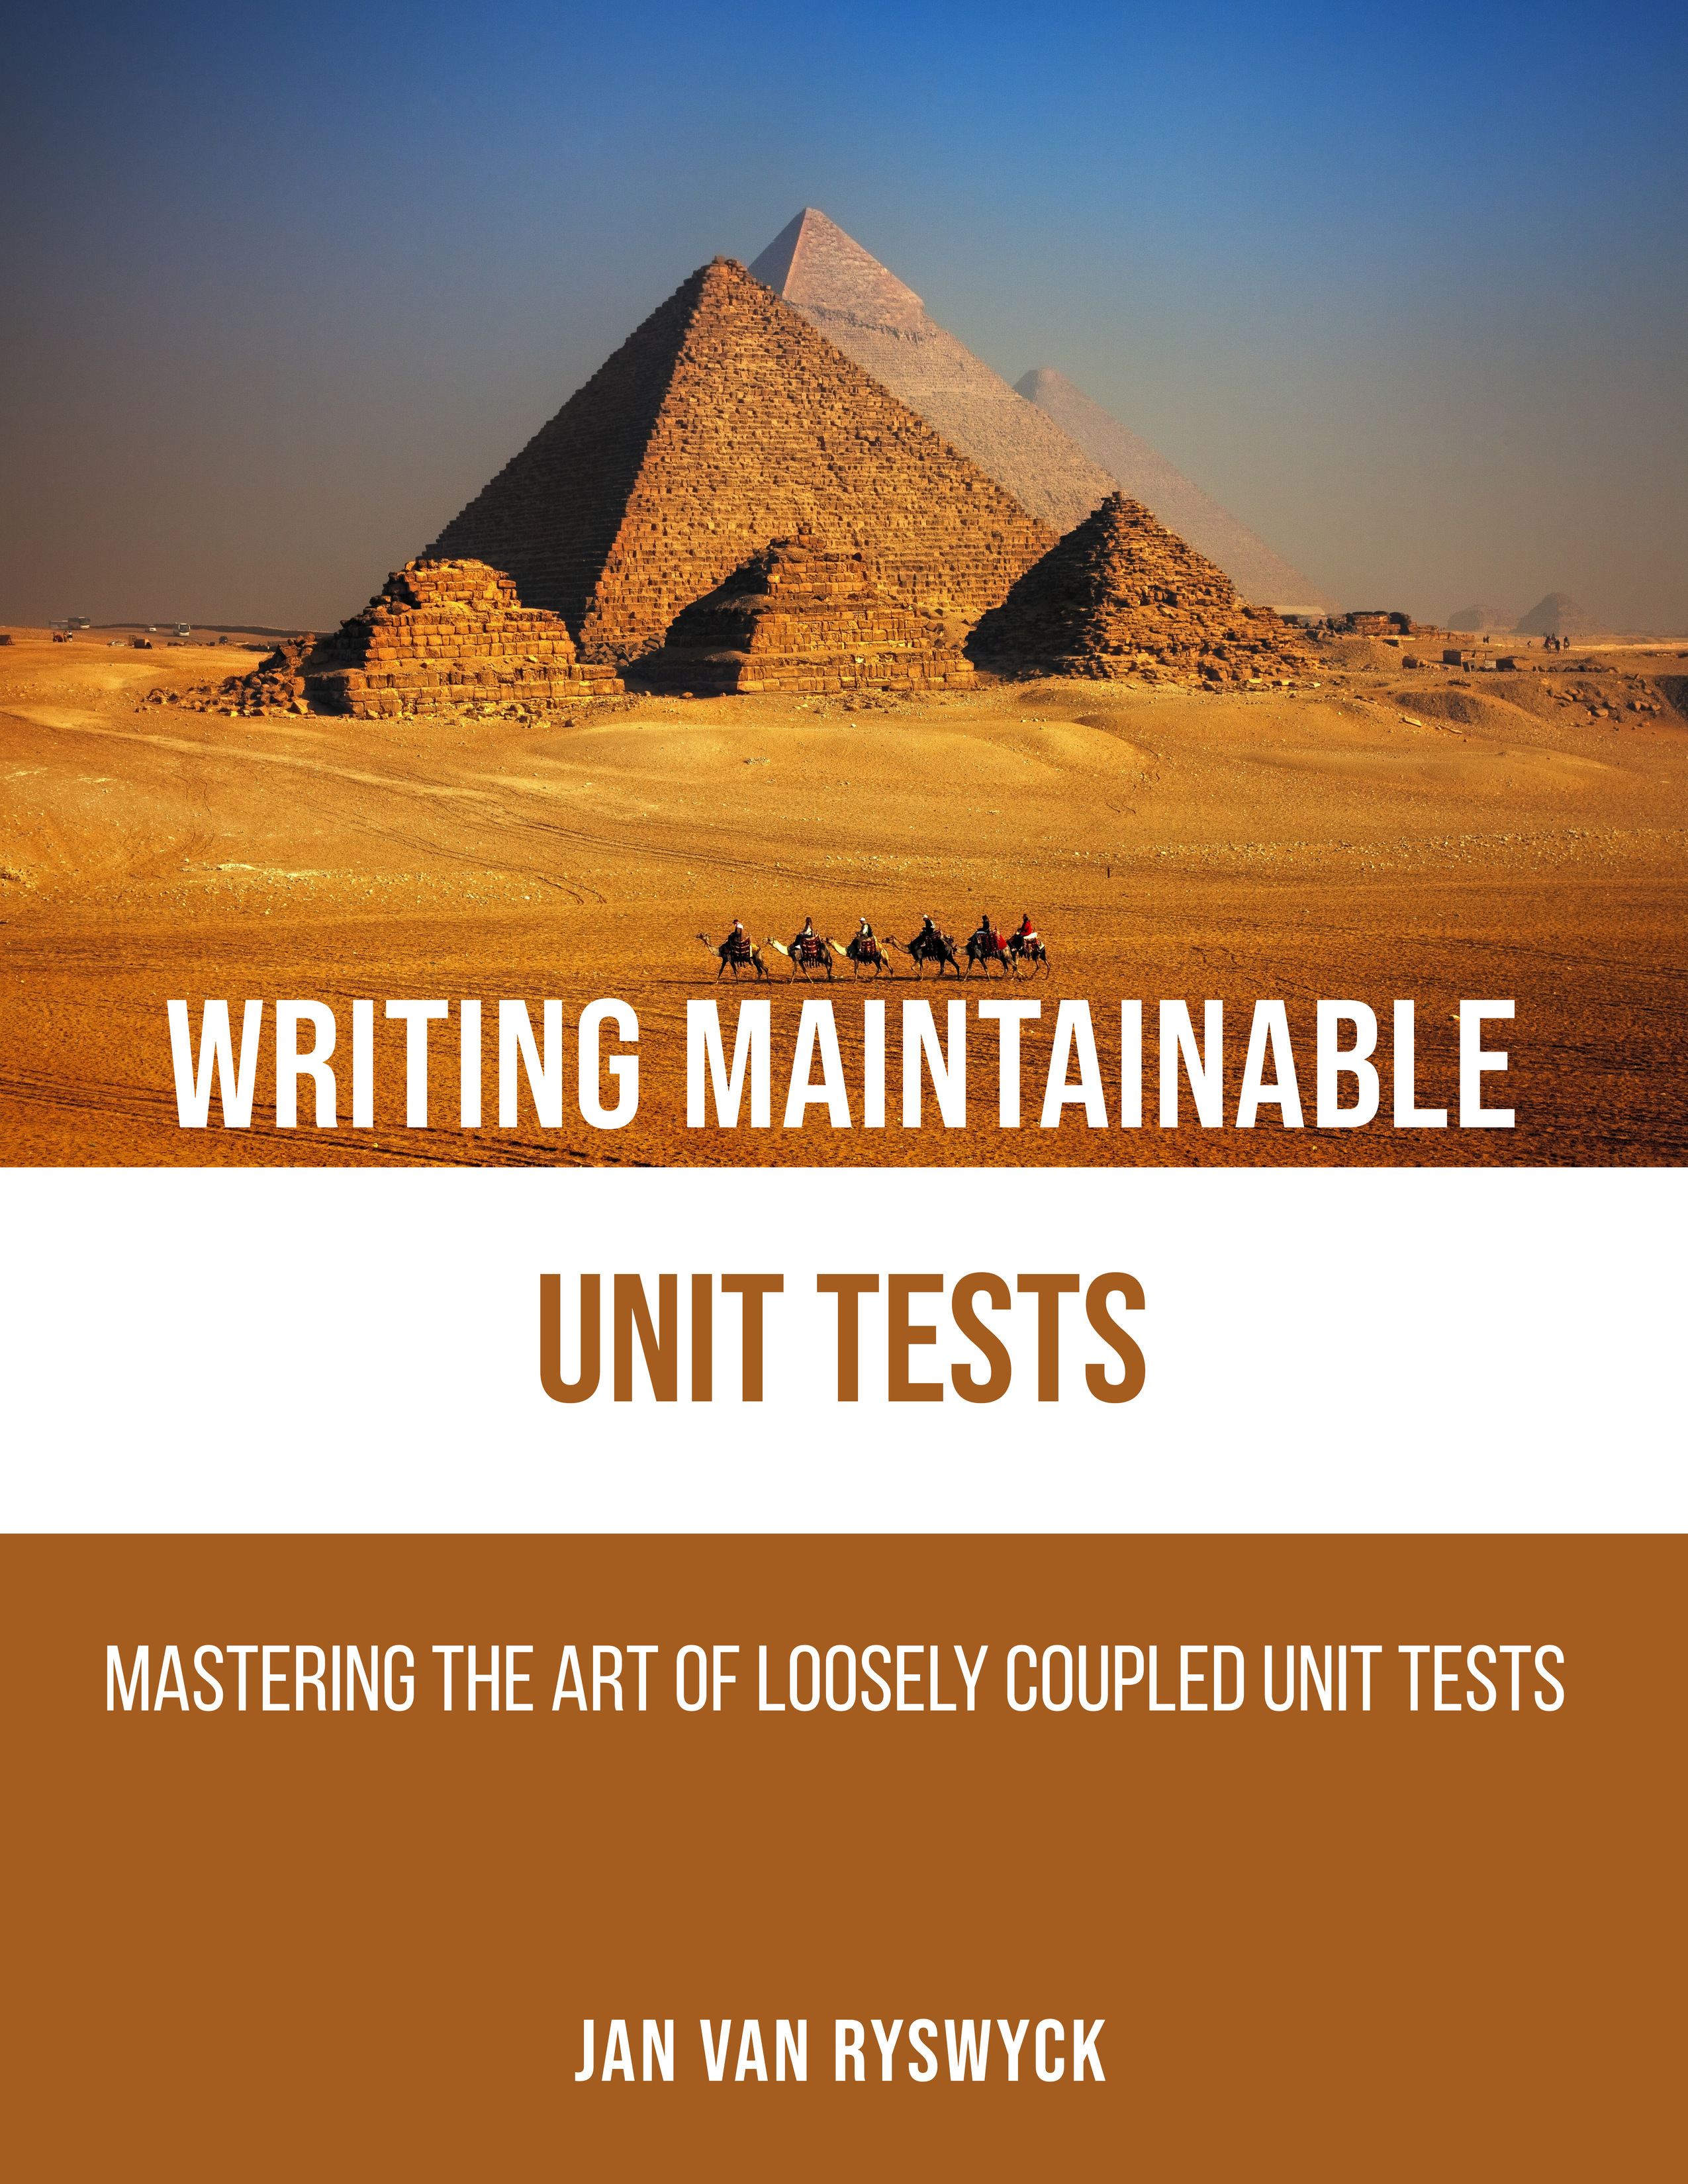 Book cover of 'Writing Maintainable Unit Tests'